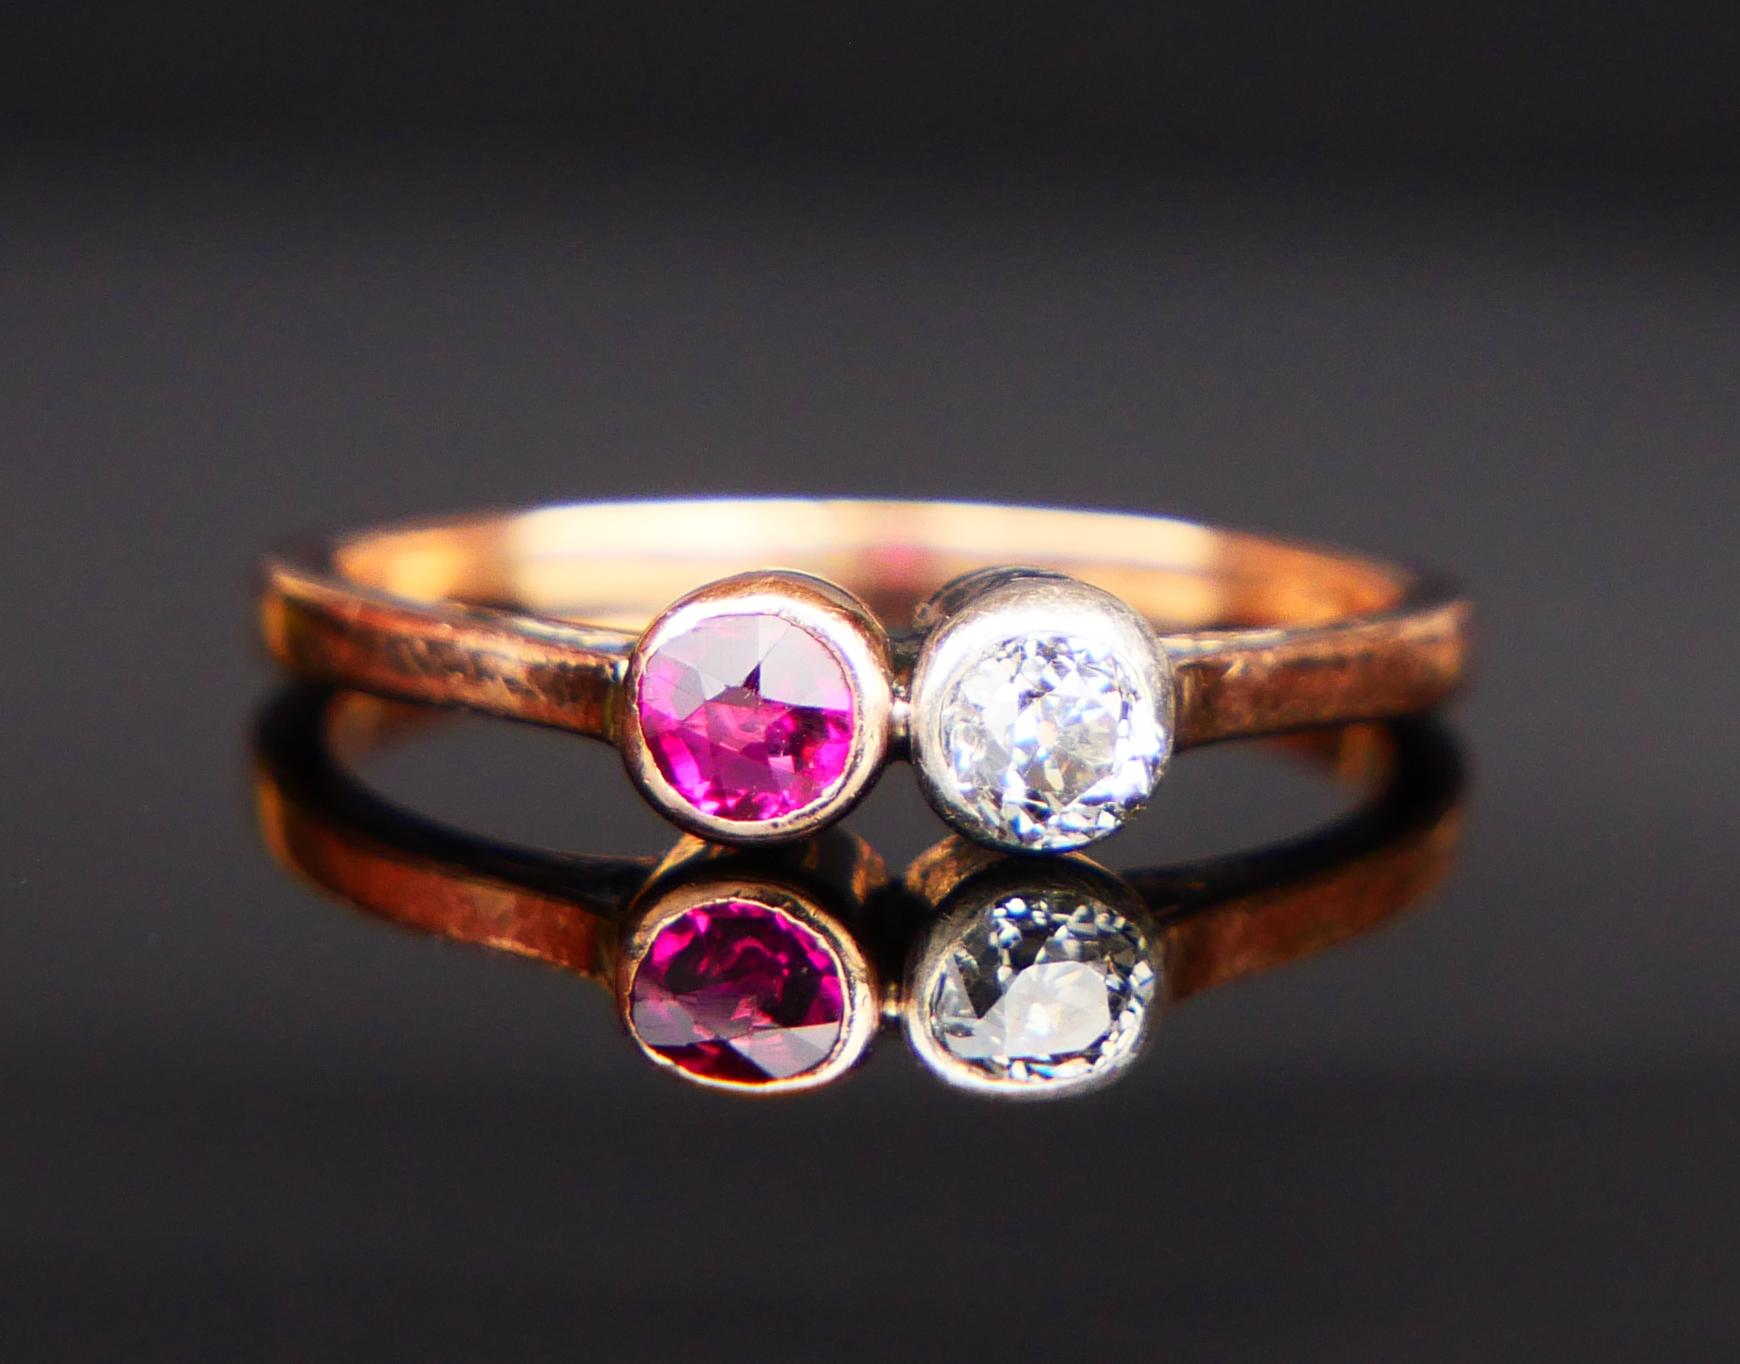 A Ring from ca. 1920s - 1930s with the band in solid 14K Rose Gold decorated with old European cut Diamond Ø 3.5 mm / ca.0.2 ct /color G,H/SI in Silver bezel and old cut Ruby in Rose Gold bezel Ø 3 mm / ca.0.2 ct. Both stones with open backs.

No